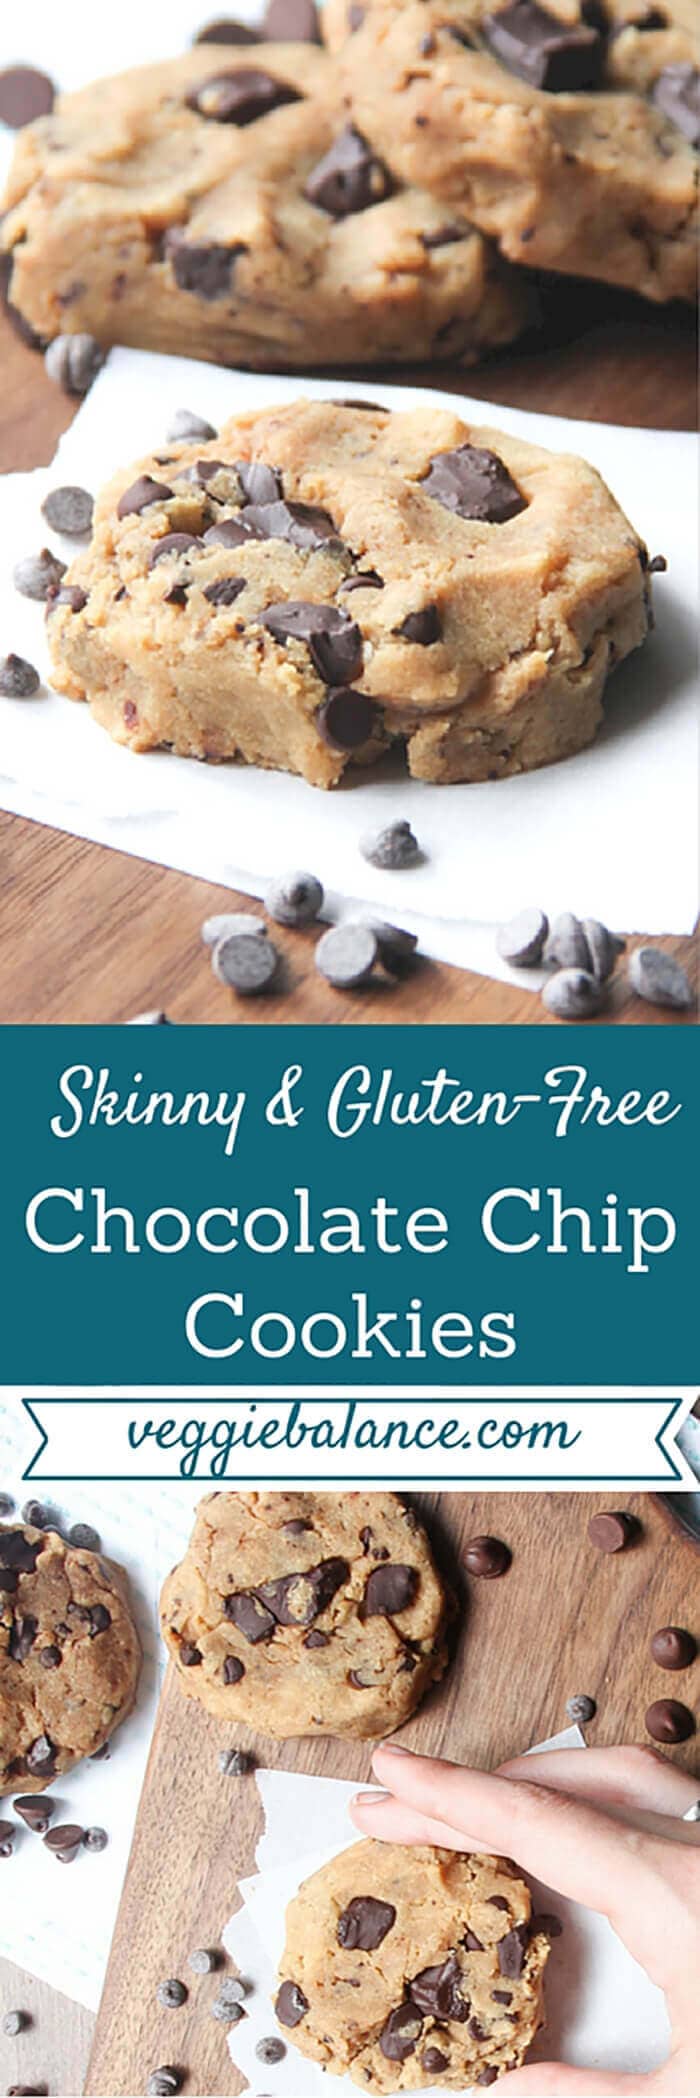 50 Best Gluten-Free Chocolate Chip Cookie Recipes to Try